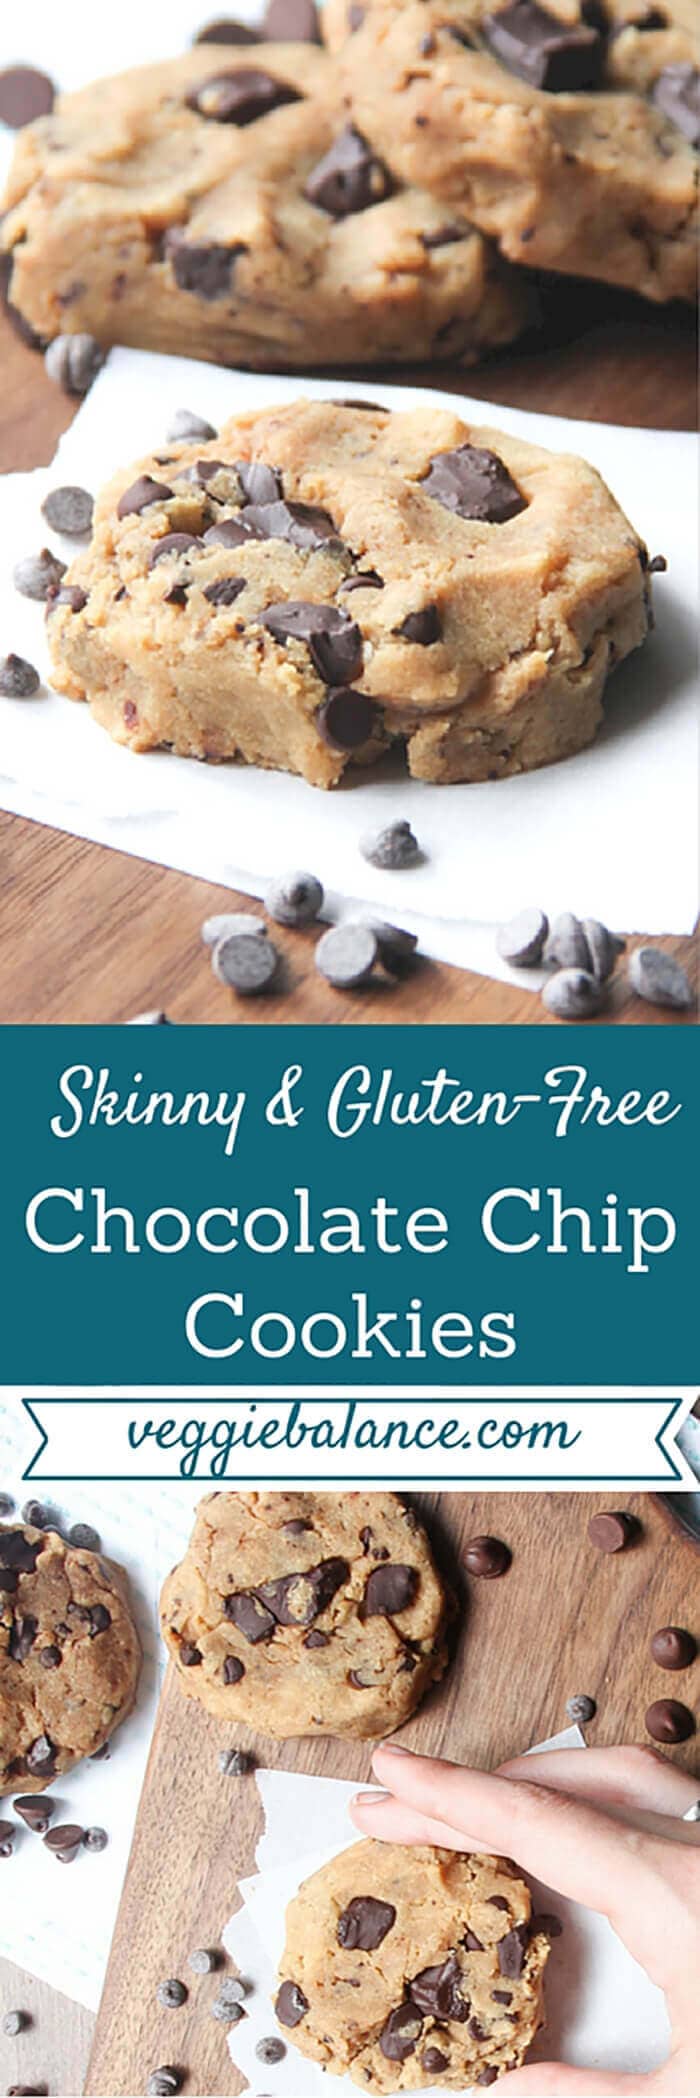 50 Best Gluten-Free Chocolate Chip Cookie Recipes to Try